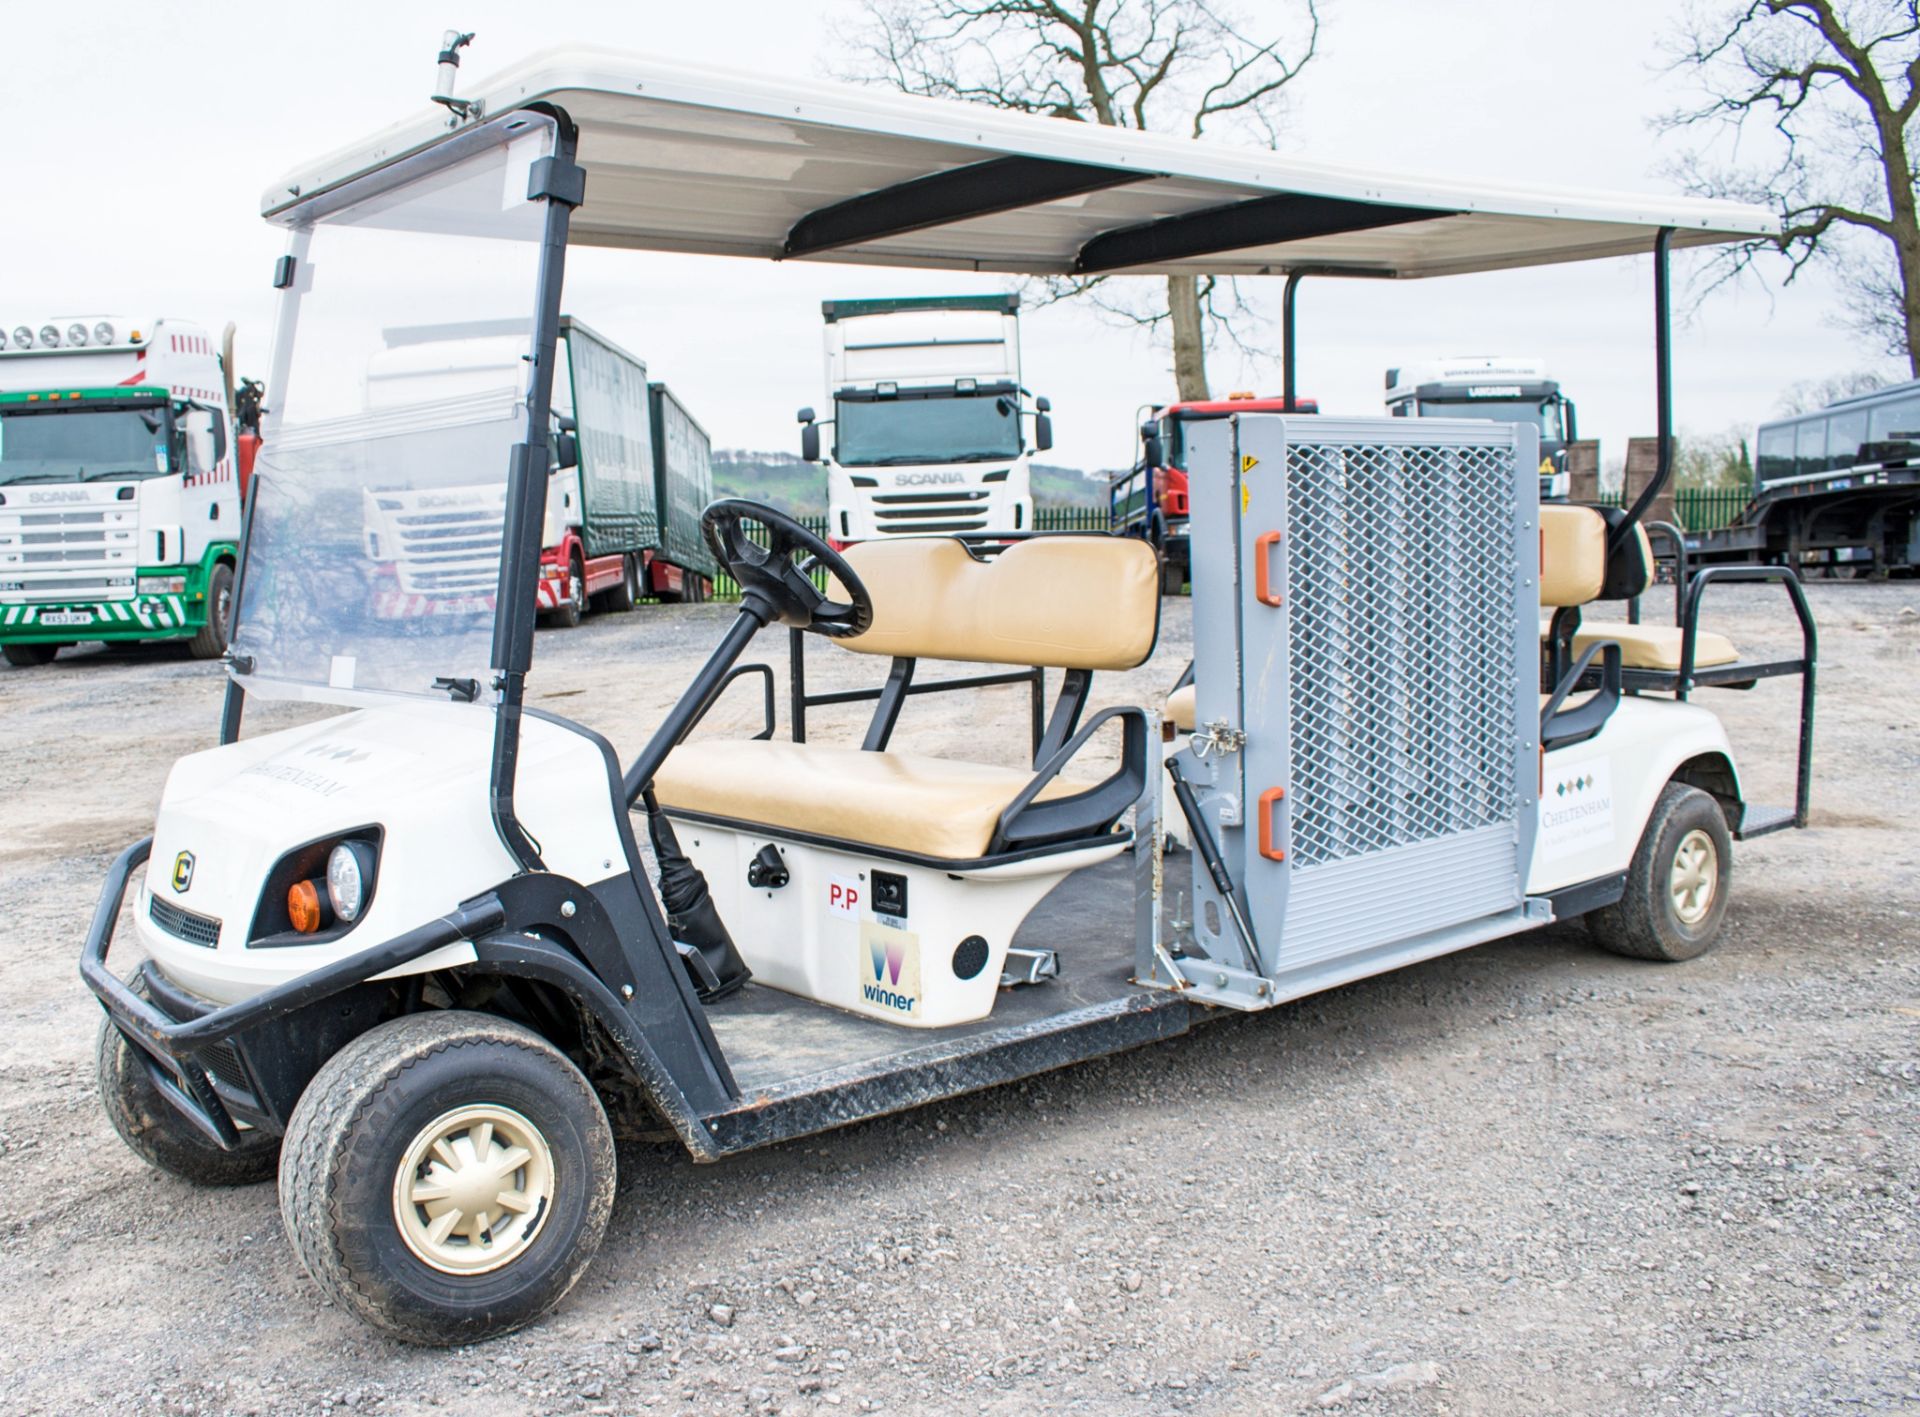 Cushman 6 seat & wheelchair petrol driven golf buggy Year: 2012 S/N: 2810582 Recorded Hours: 0060